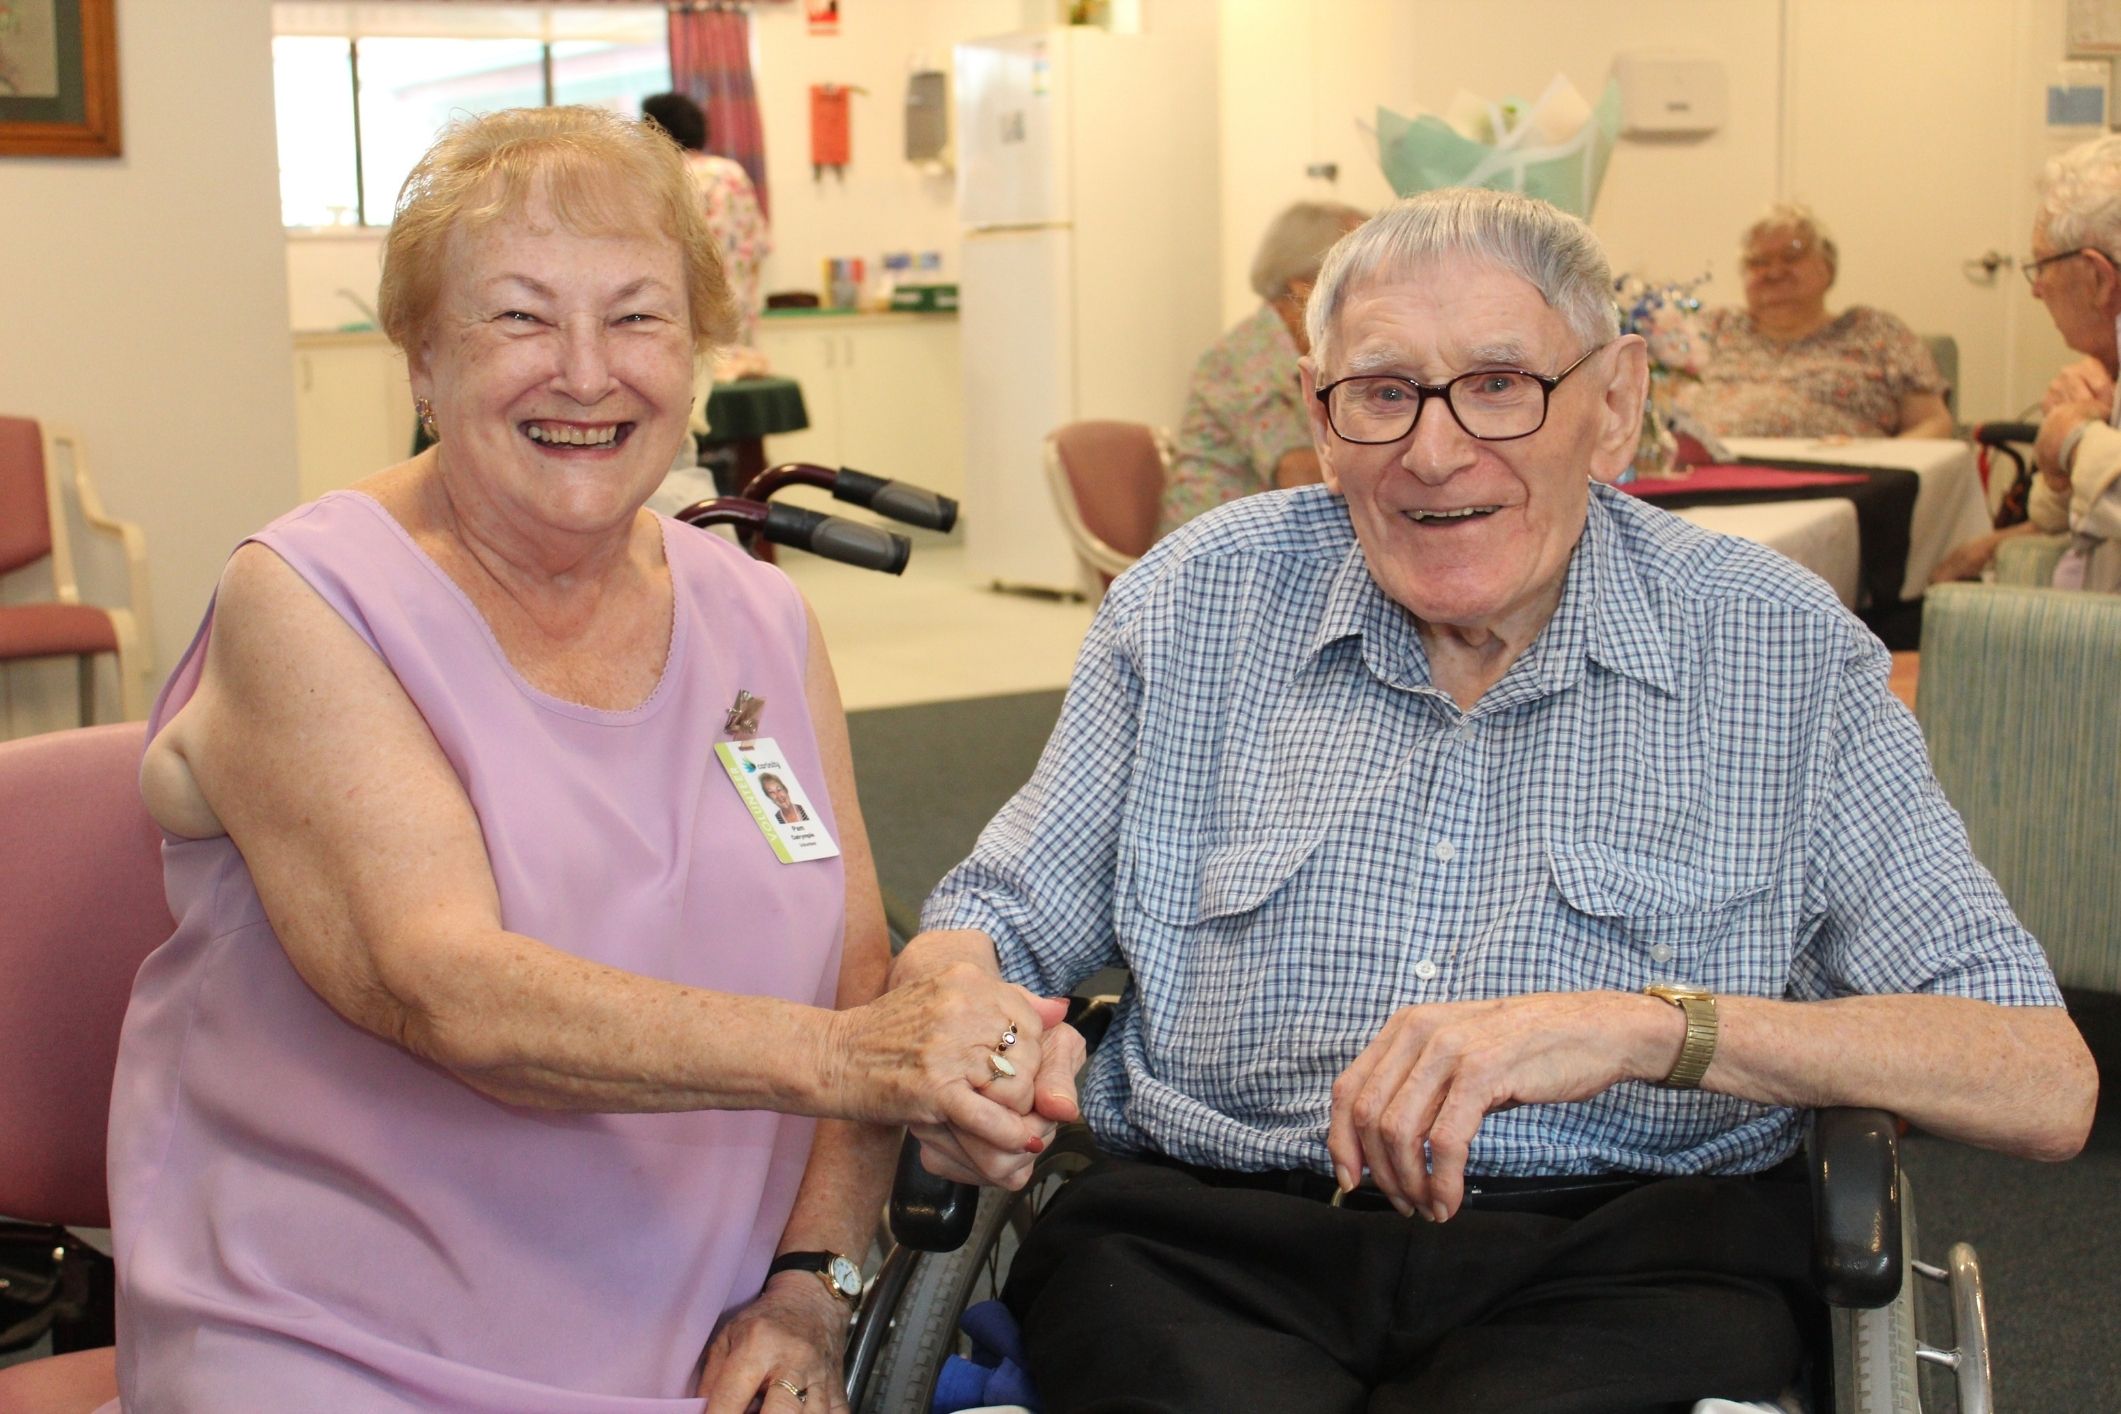 Retiree volunteers at aged care home